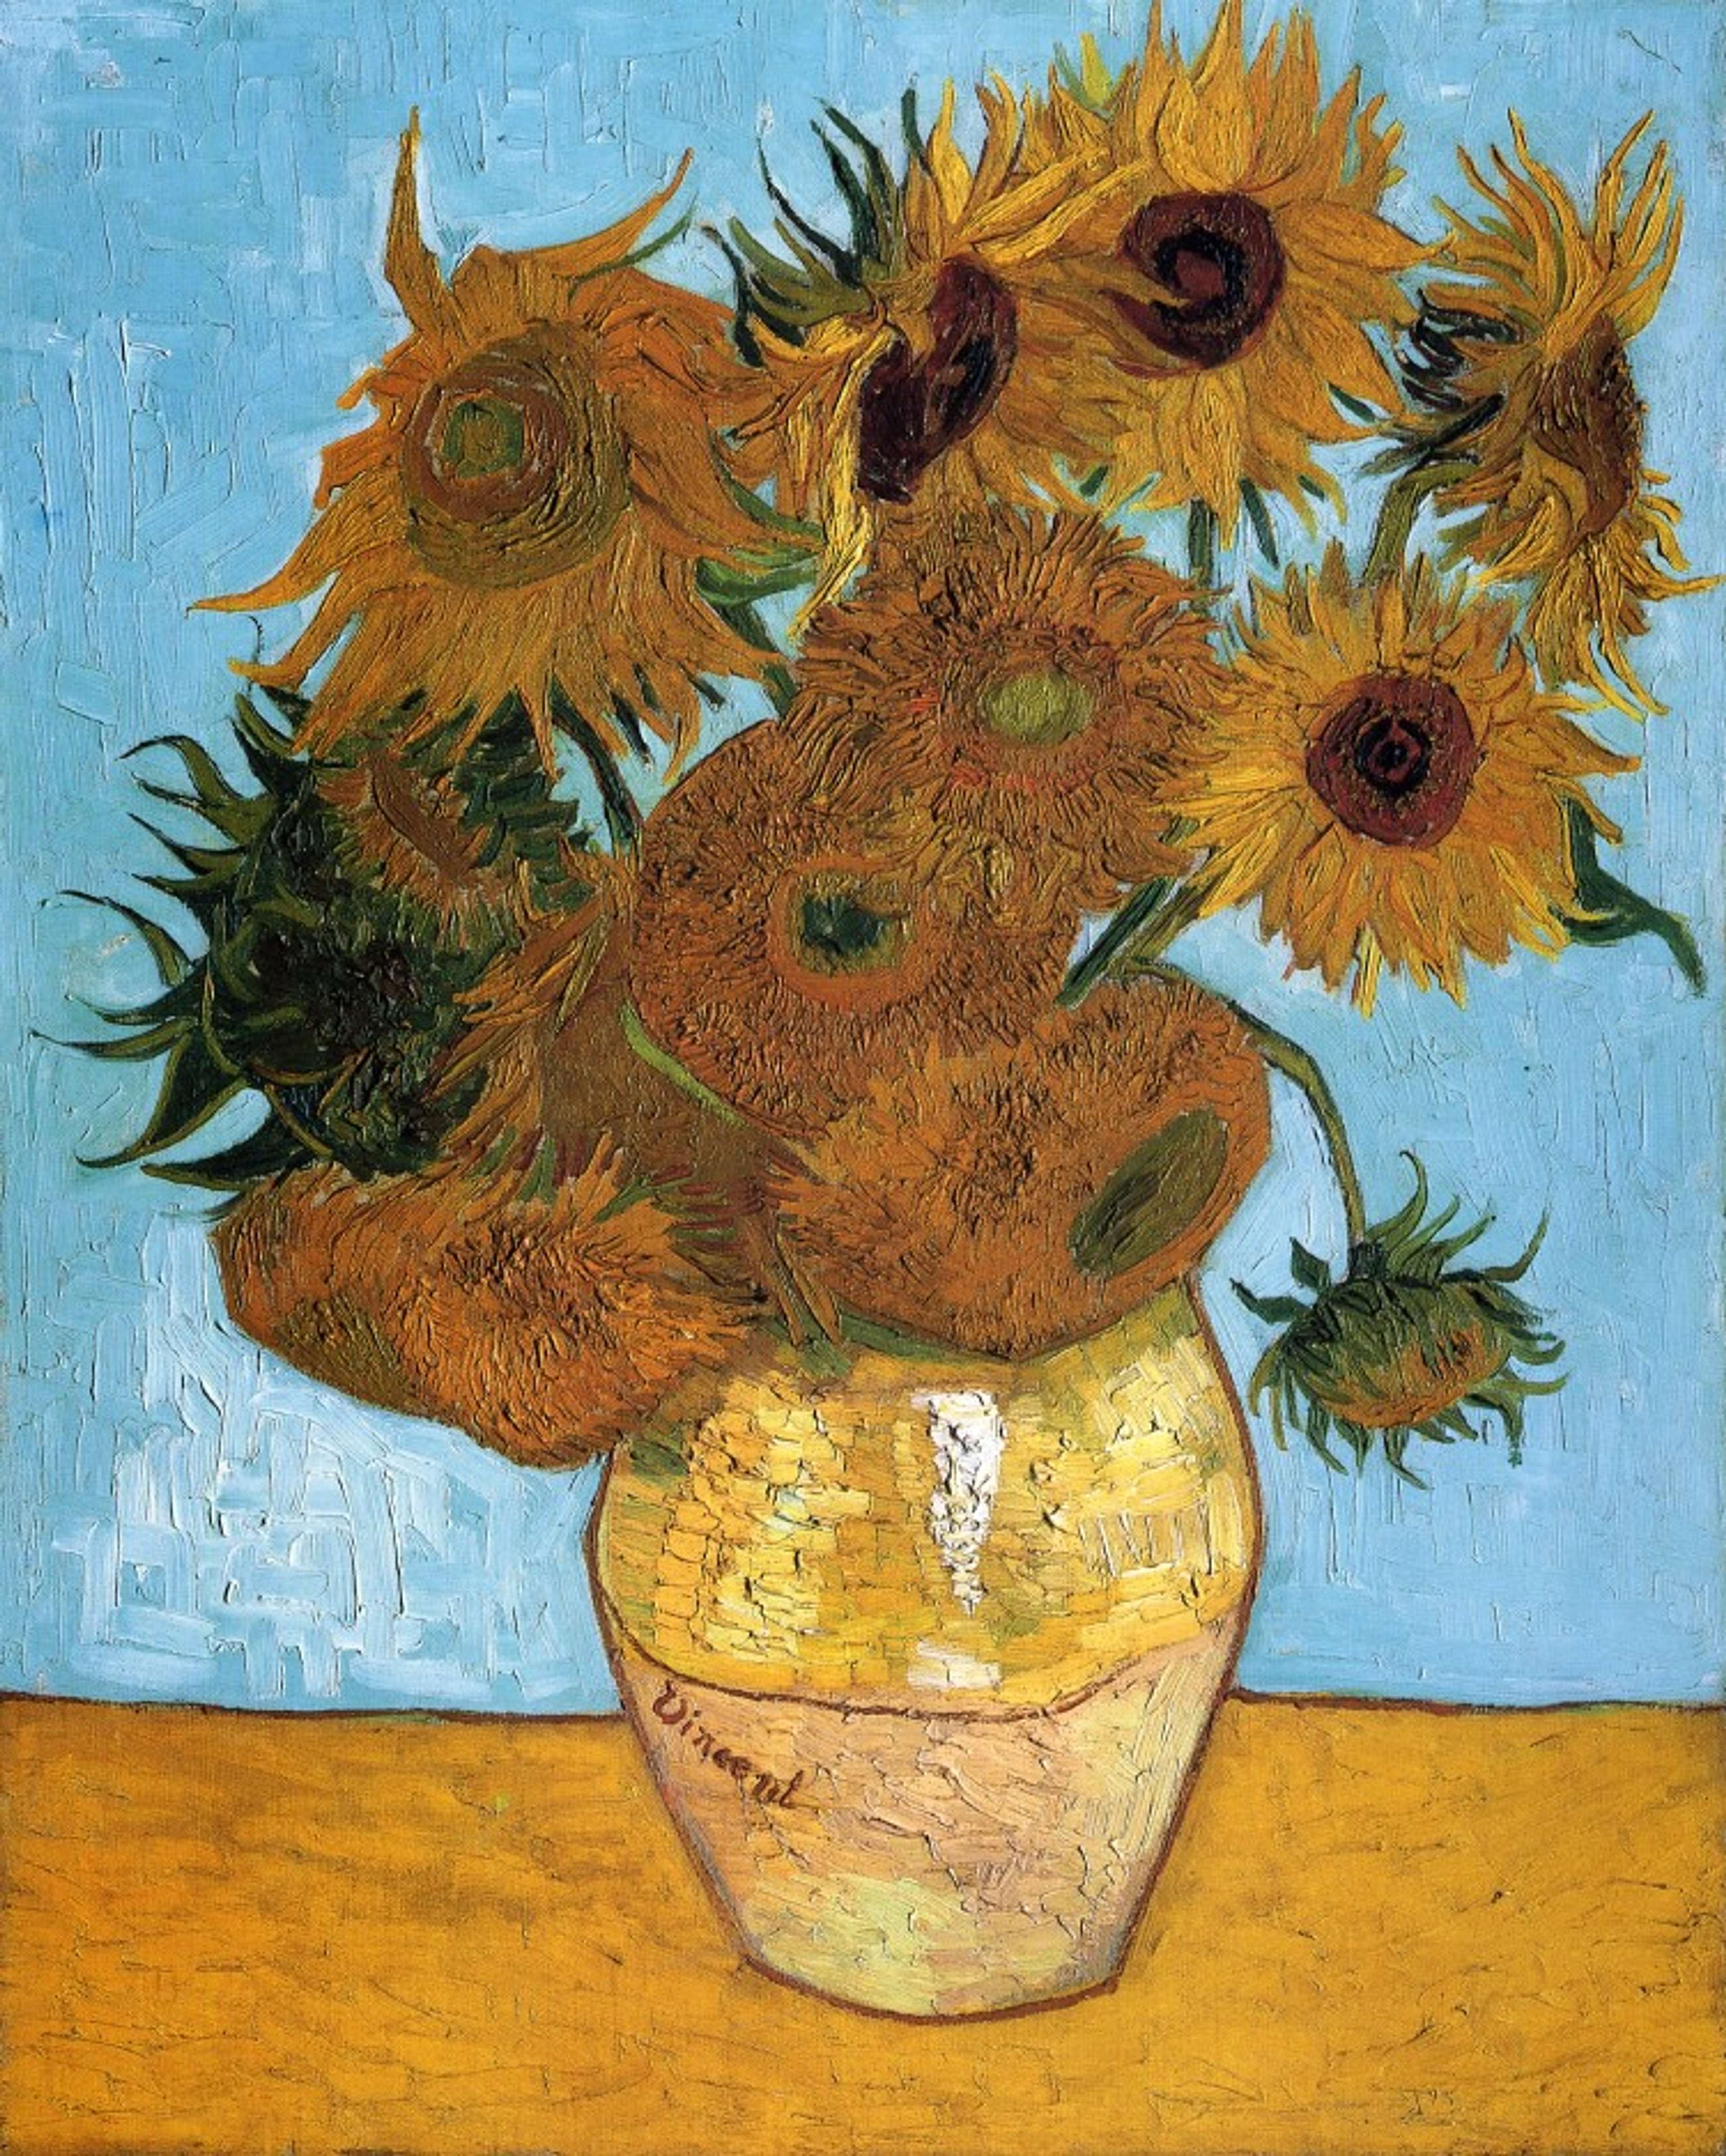 Sunflowers (1888) by Vincent Van Gogh - © Gandalf’s Gallery. CC BY-NC-SA 2.0